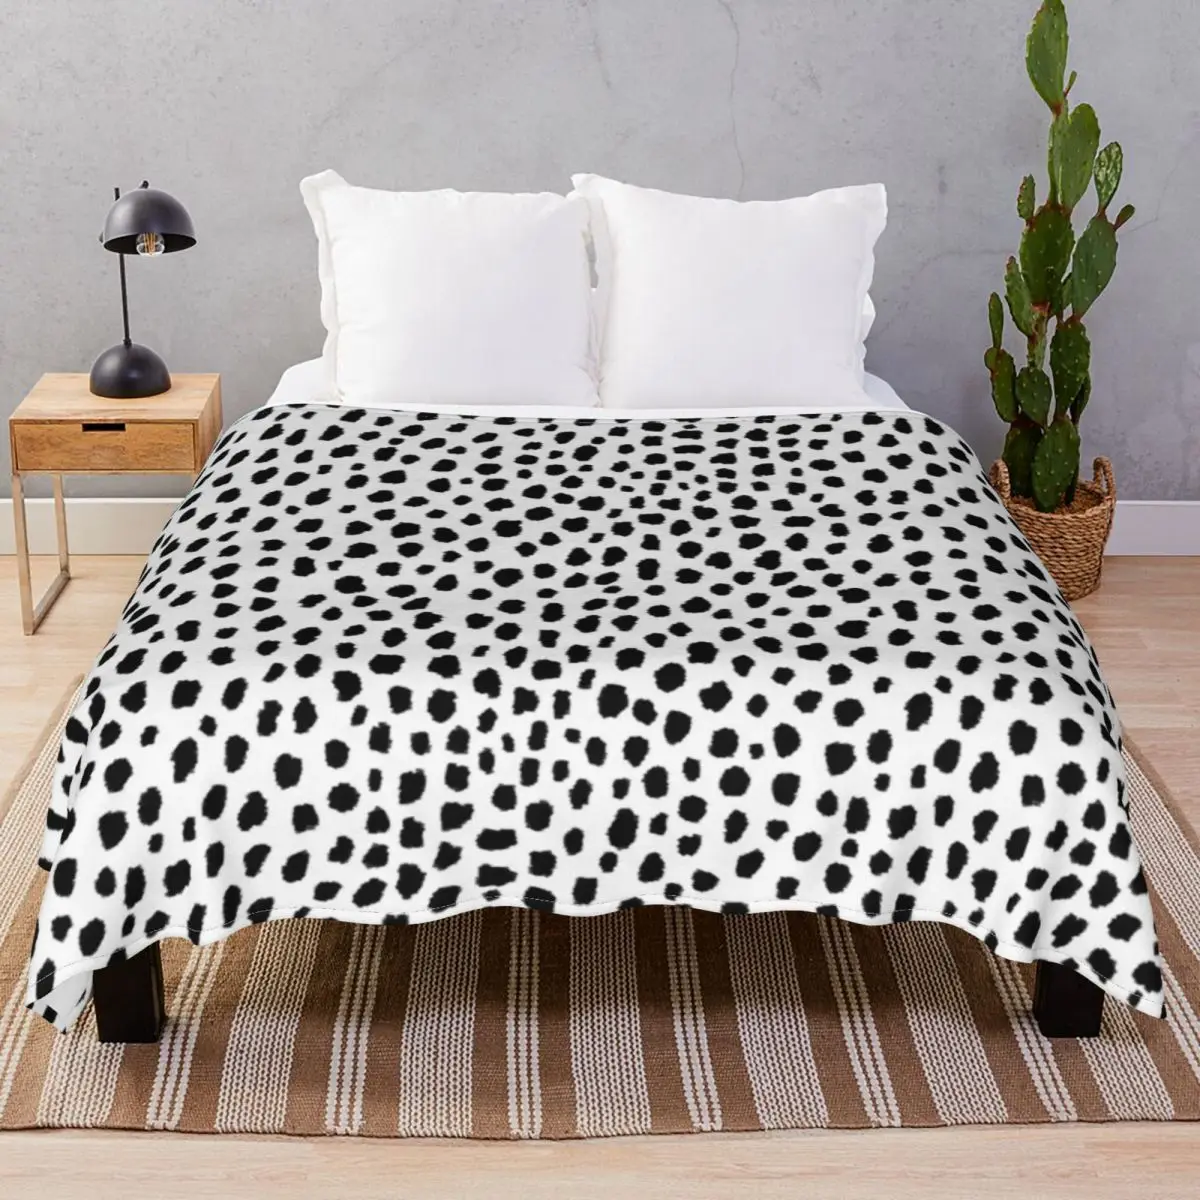 Dalmatian Spots Black white Blankets Coral Fleece Autumn/Winter Ultra-Soft Throw Blanket for Bedding Home Couch Camp Office